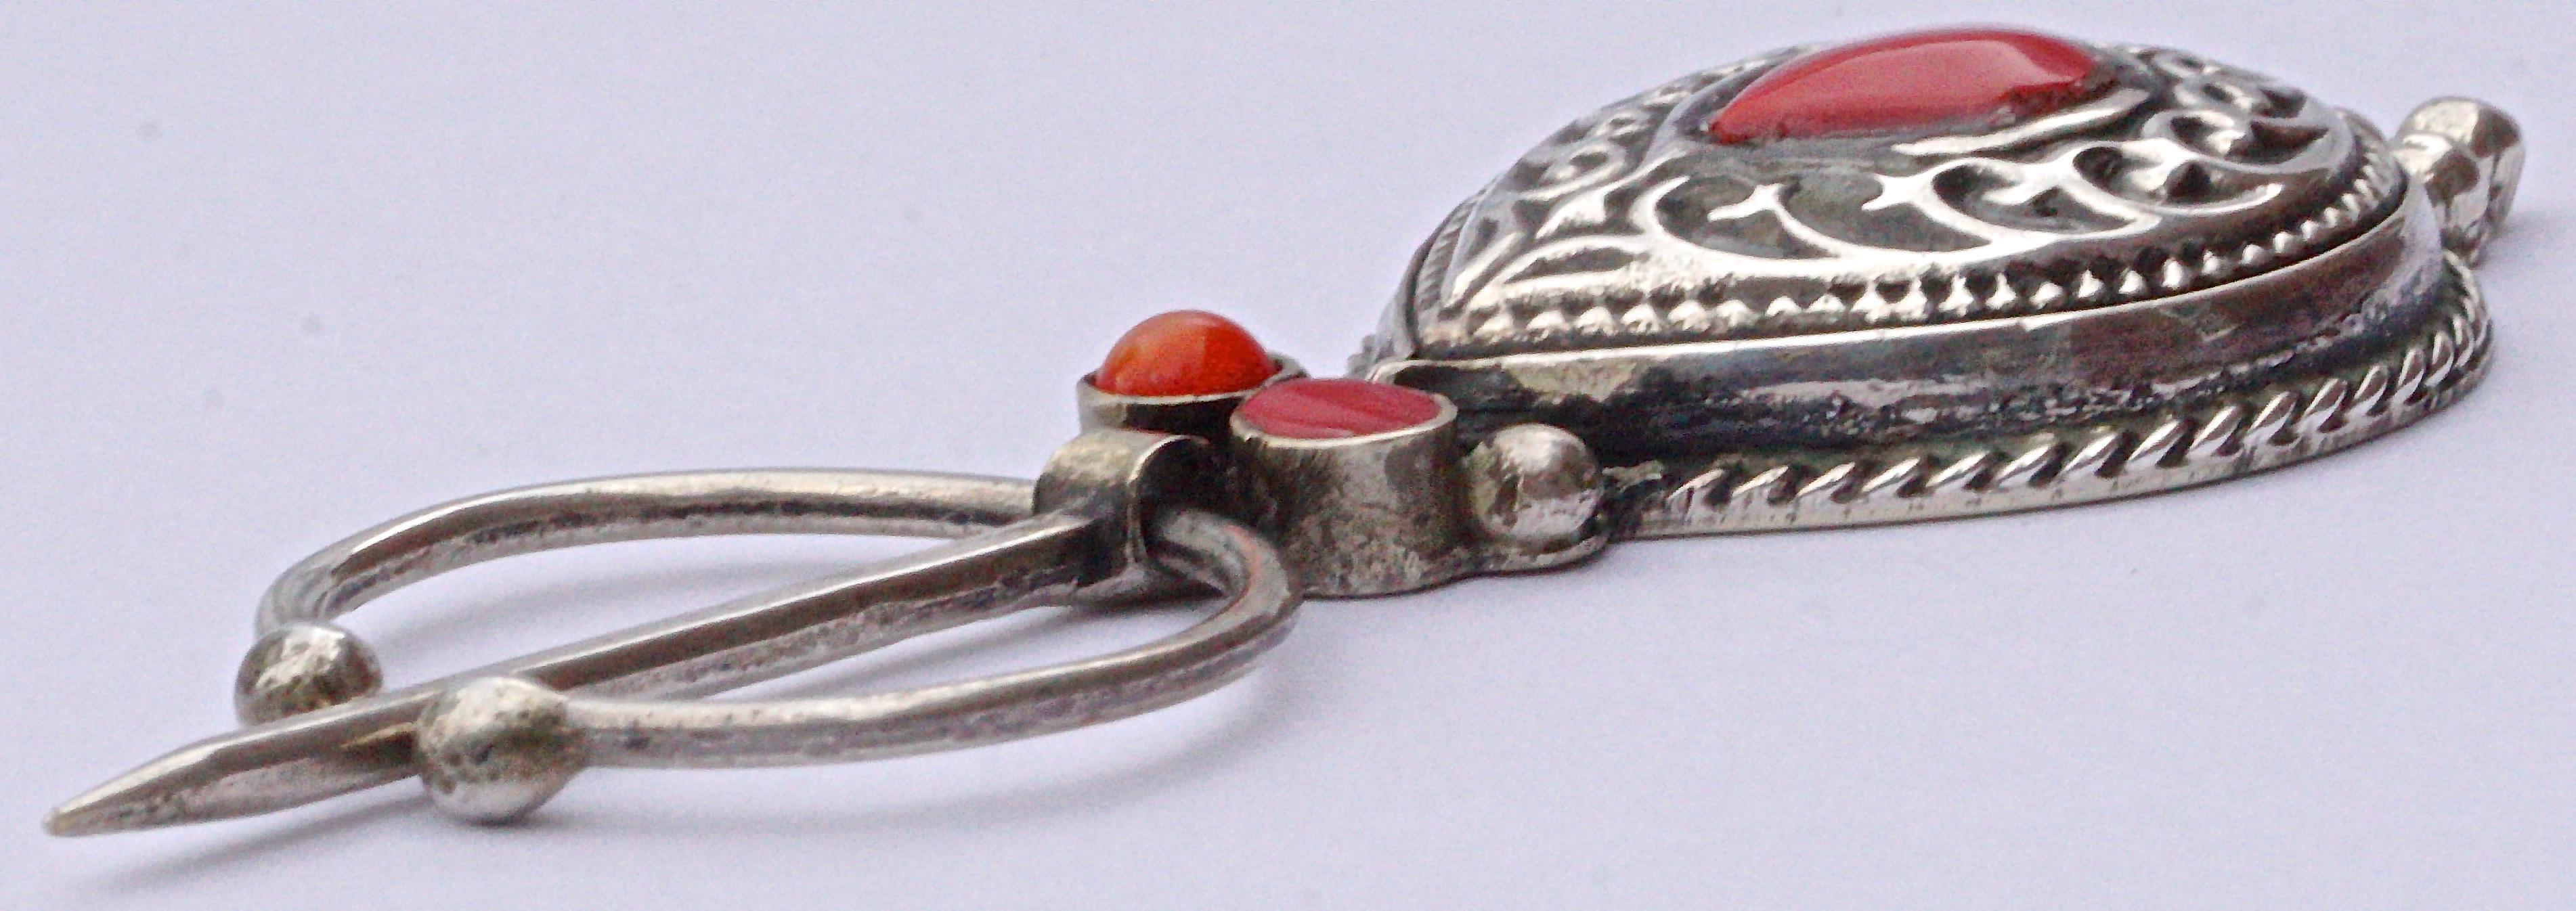 Moroccan Berber Silver Penannular Brooch with Glass Coral Stones 1